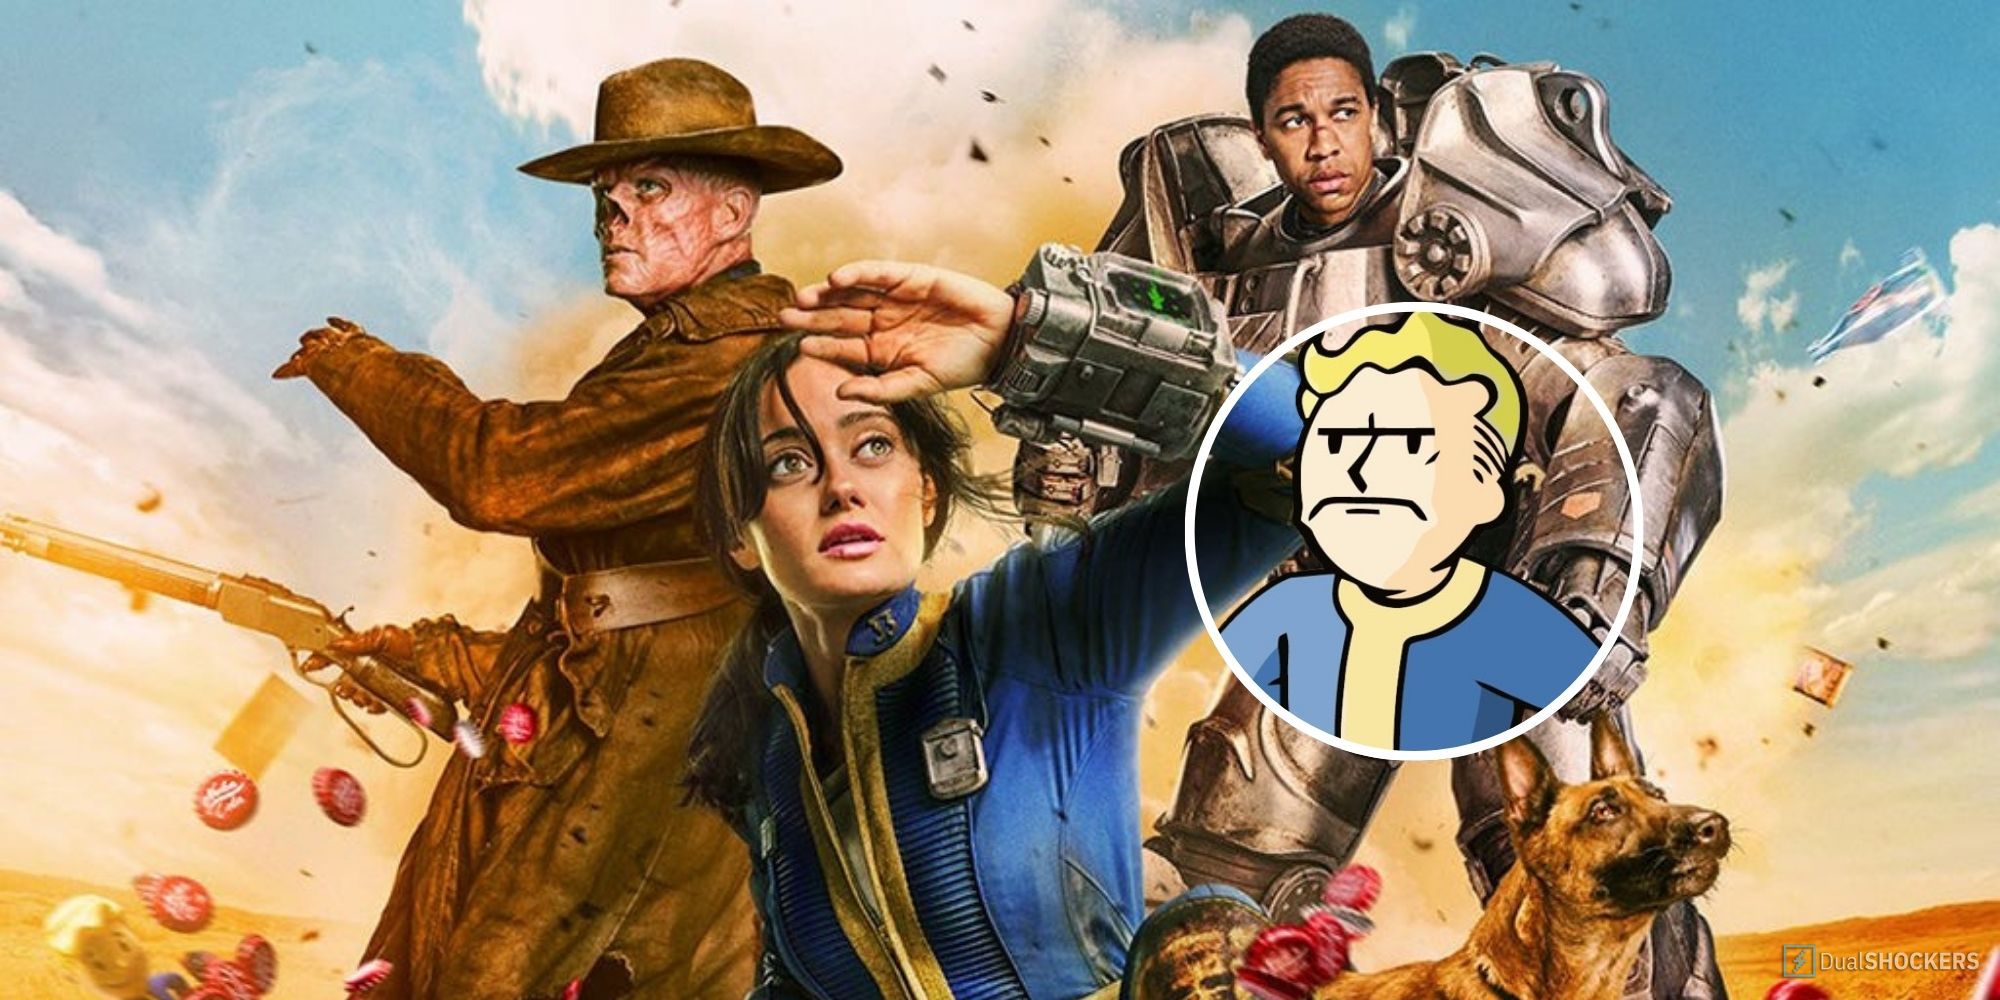 Promotional banner from Fallout with Lucy, Maximus, and the Ghoul next to an angry Vault Boy.